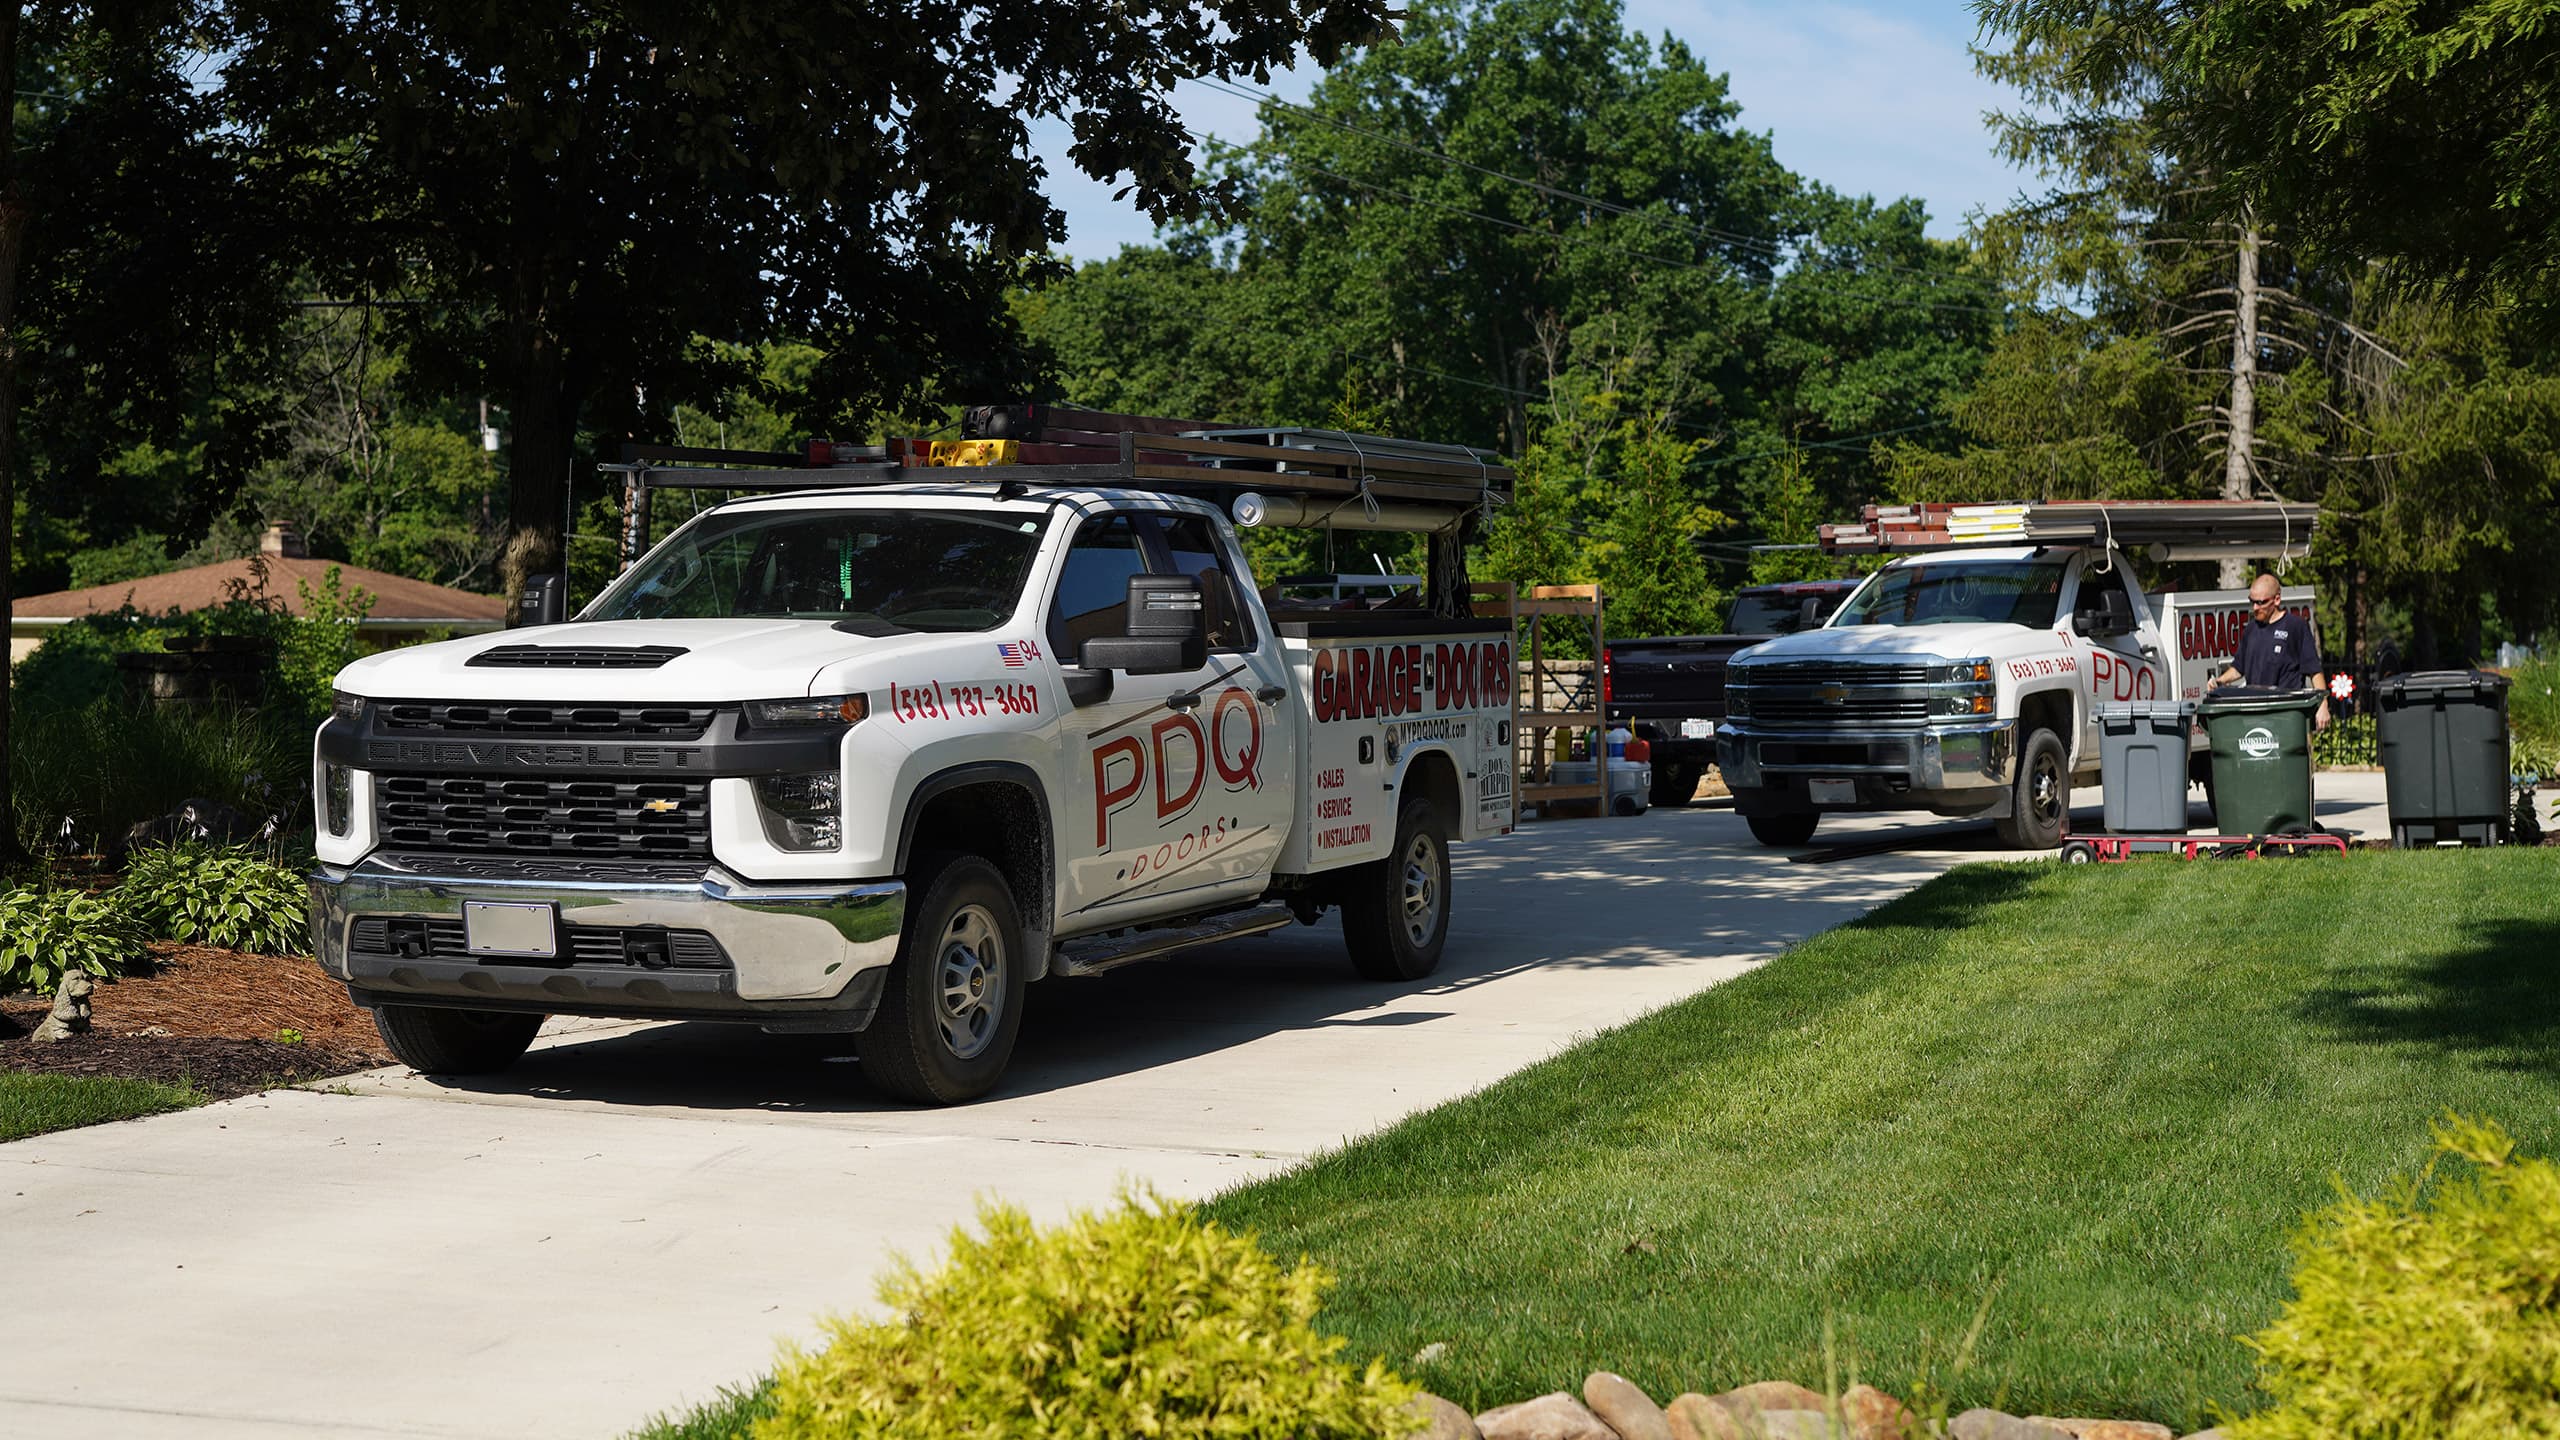 PDQ Doors service, installation, and repair trucks parked in a suburban residential driveway in the Greater Cincinnati area